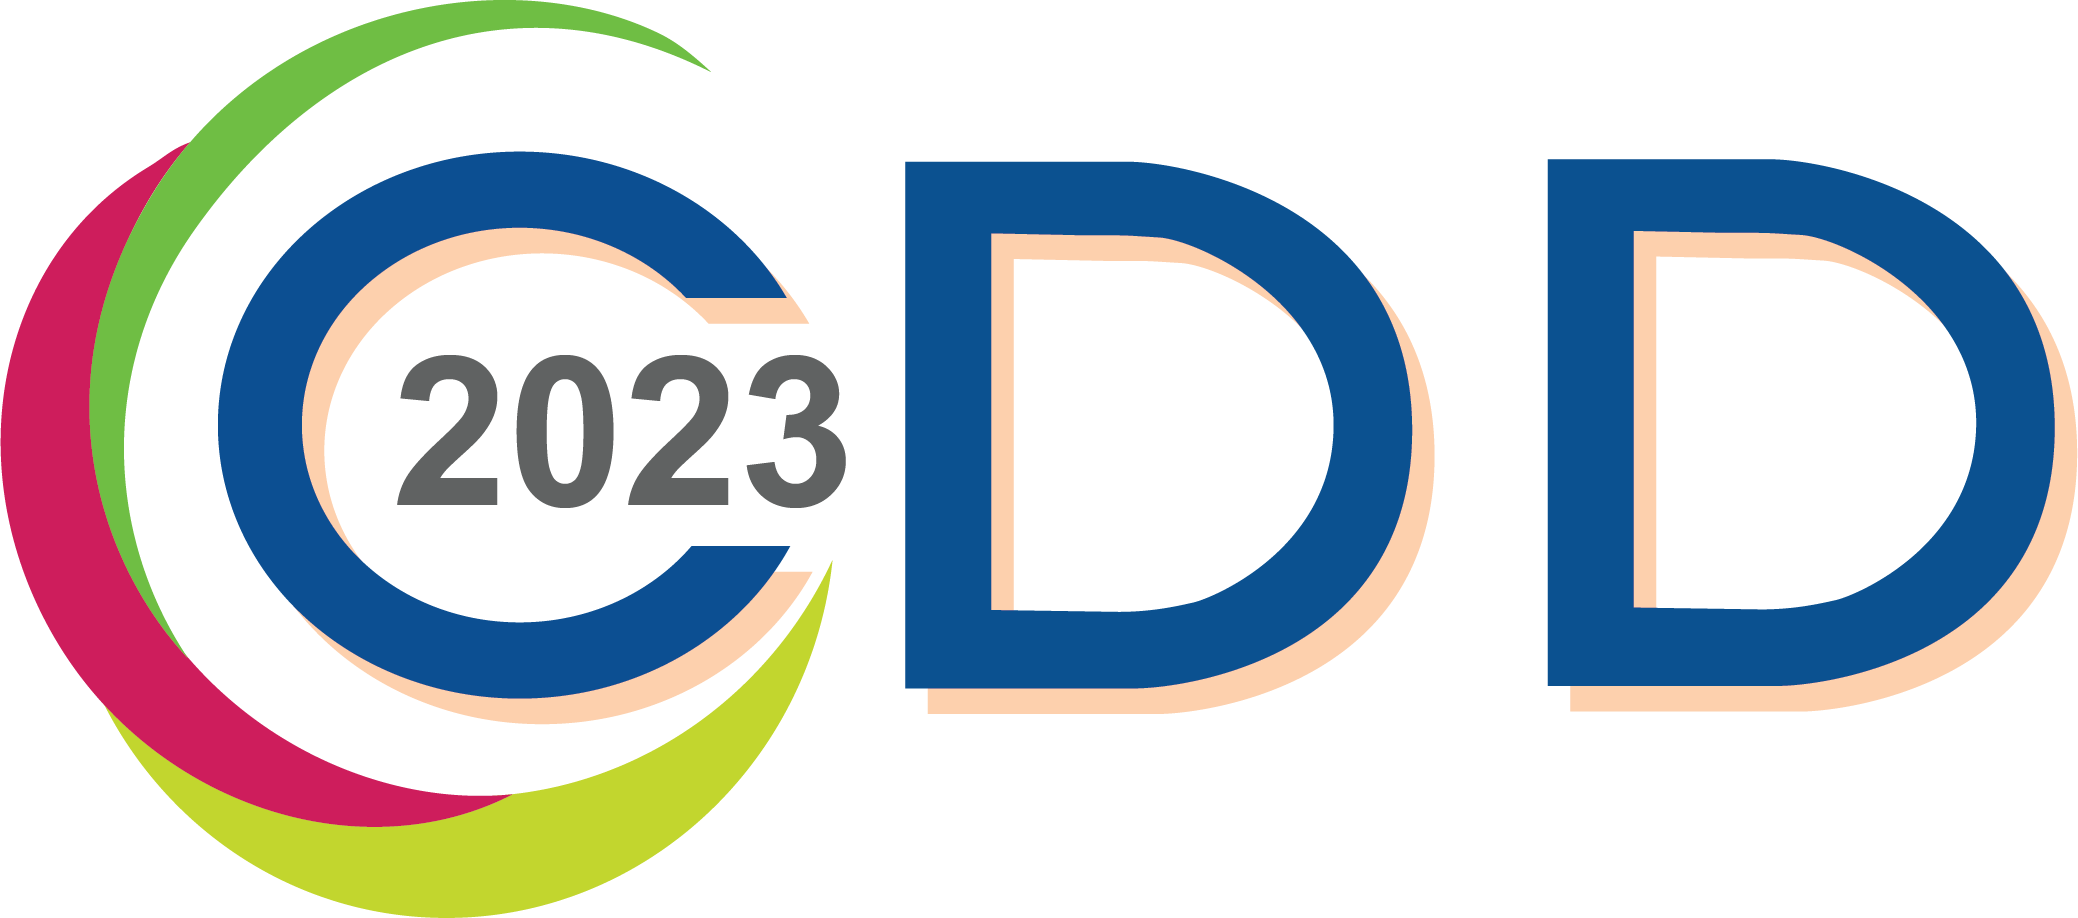 CDD2020 Conference